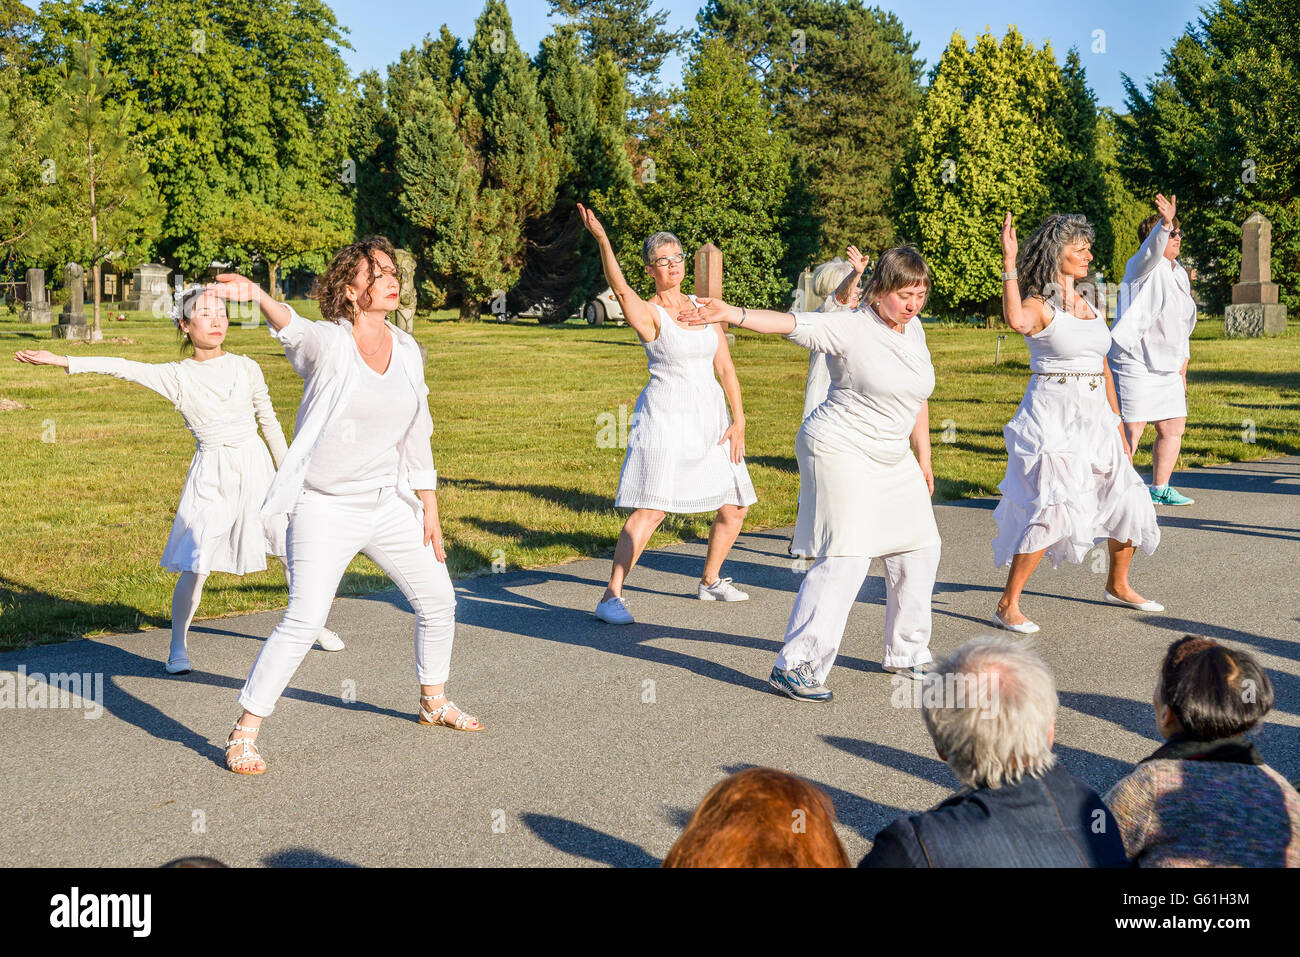 Summer Solstice Celebration at Mountain View Cemetery, Vancouver, British Columbia, Canada, Stock Photo